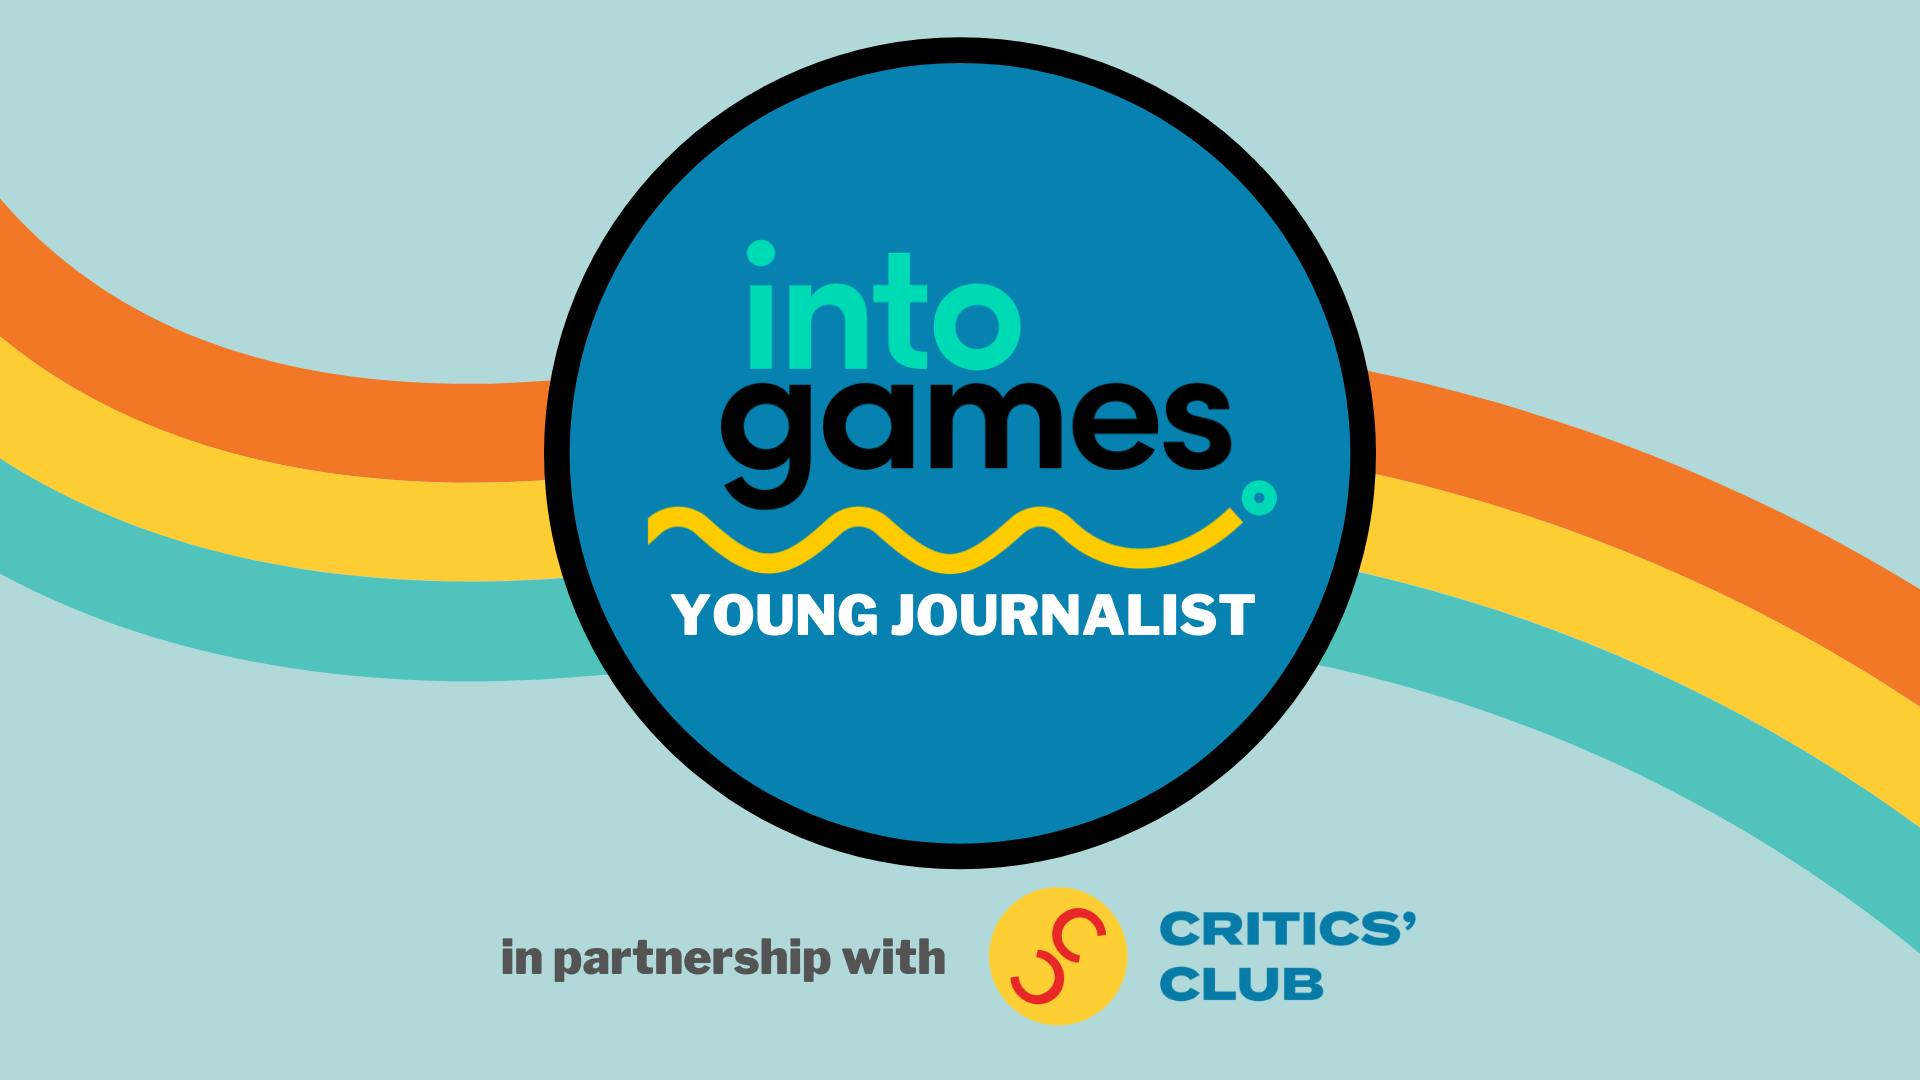 Introducing Into Games Young Journalist